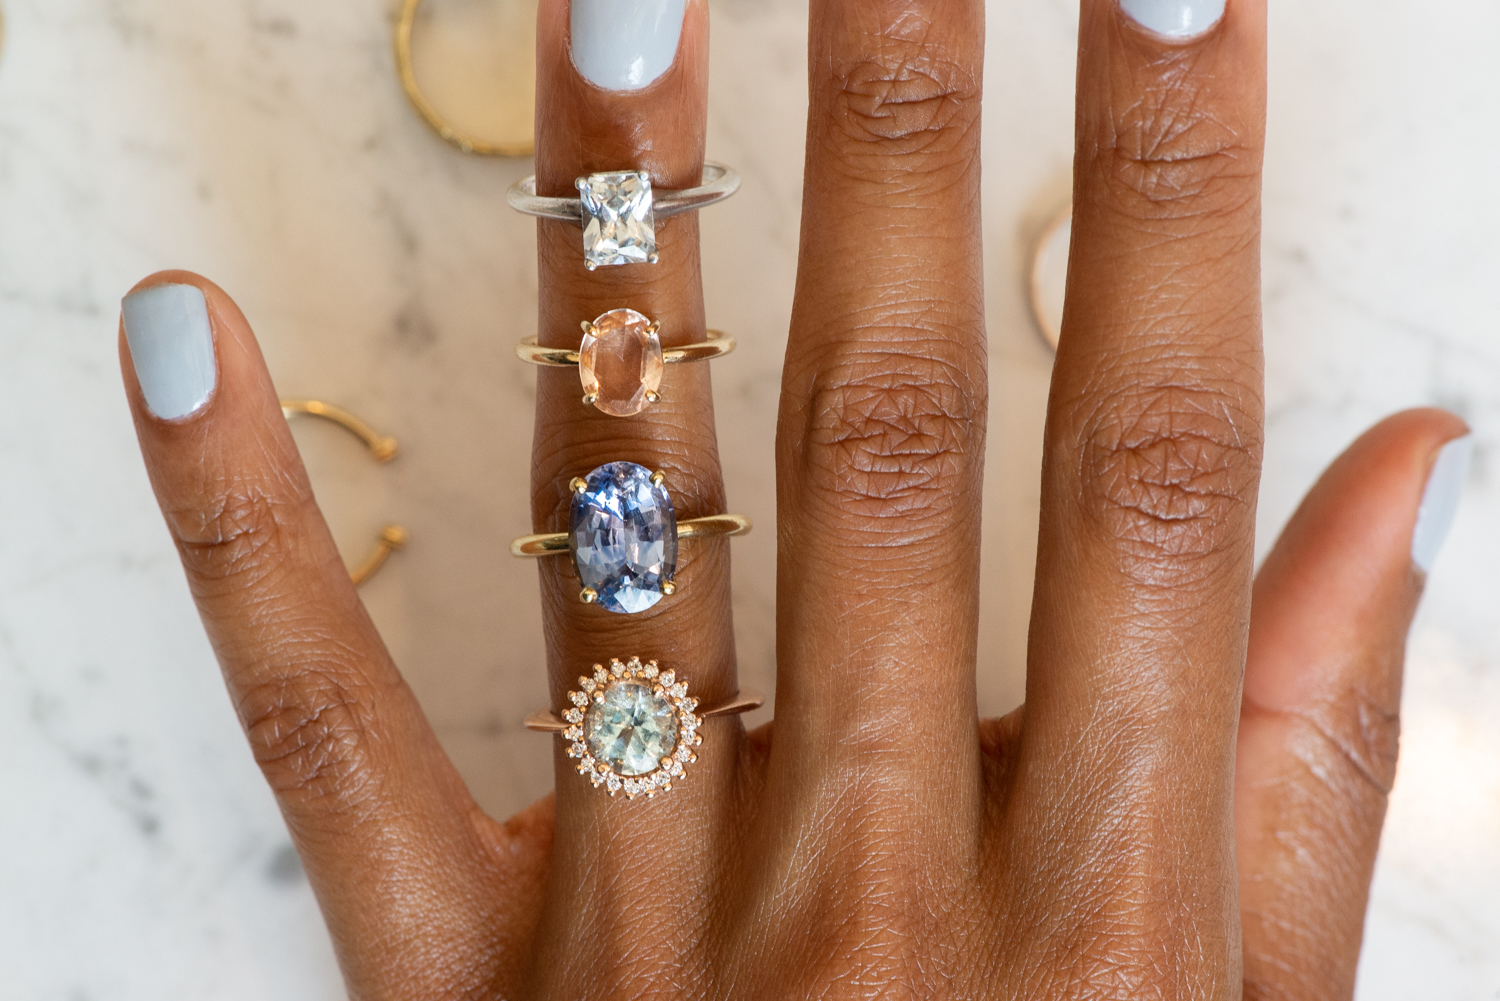 Gold Jewelry 101: The 4 Types You Should Know About – Noray Designs